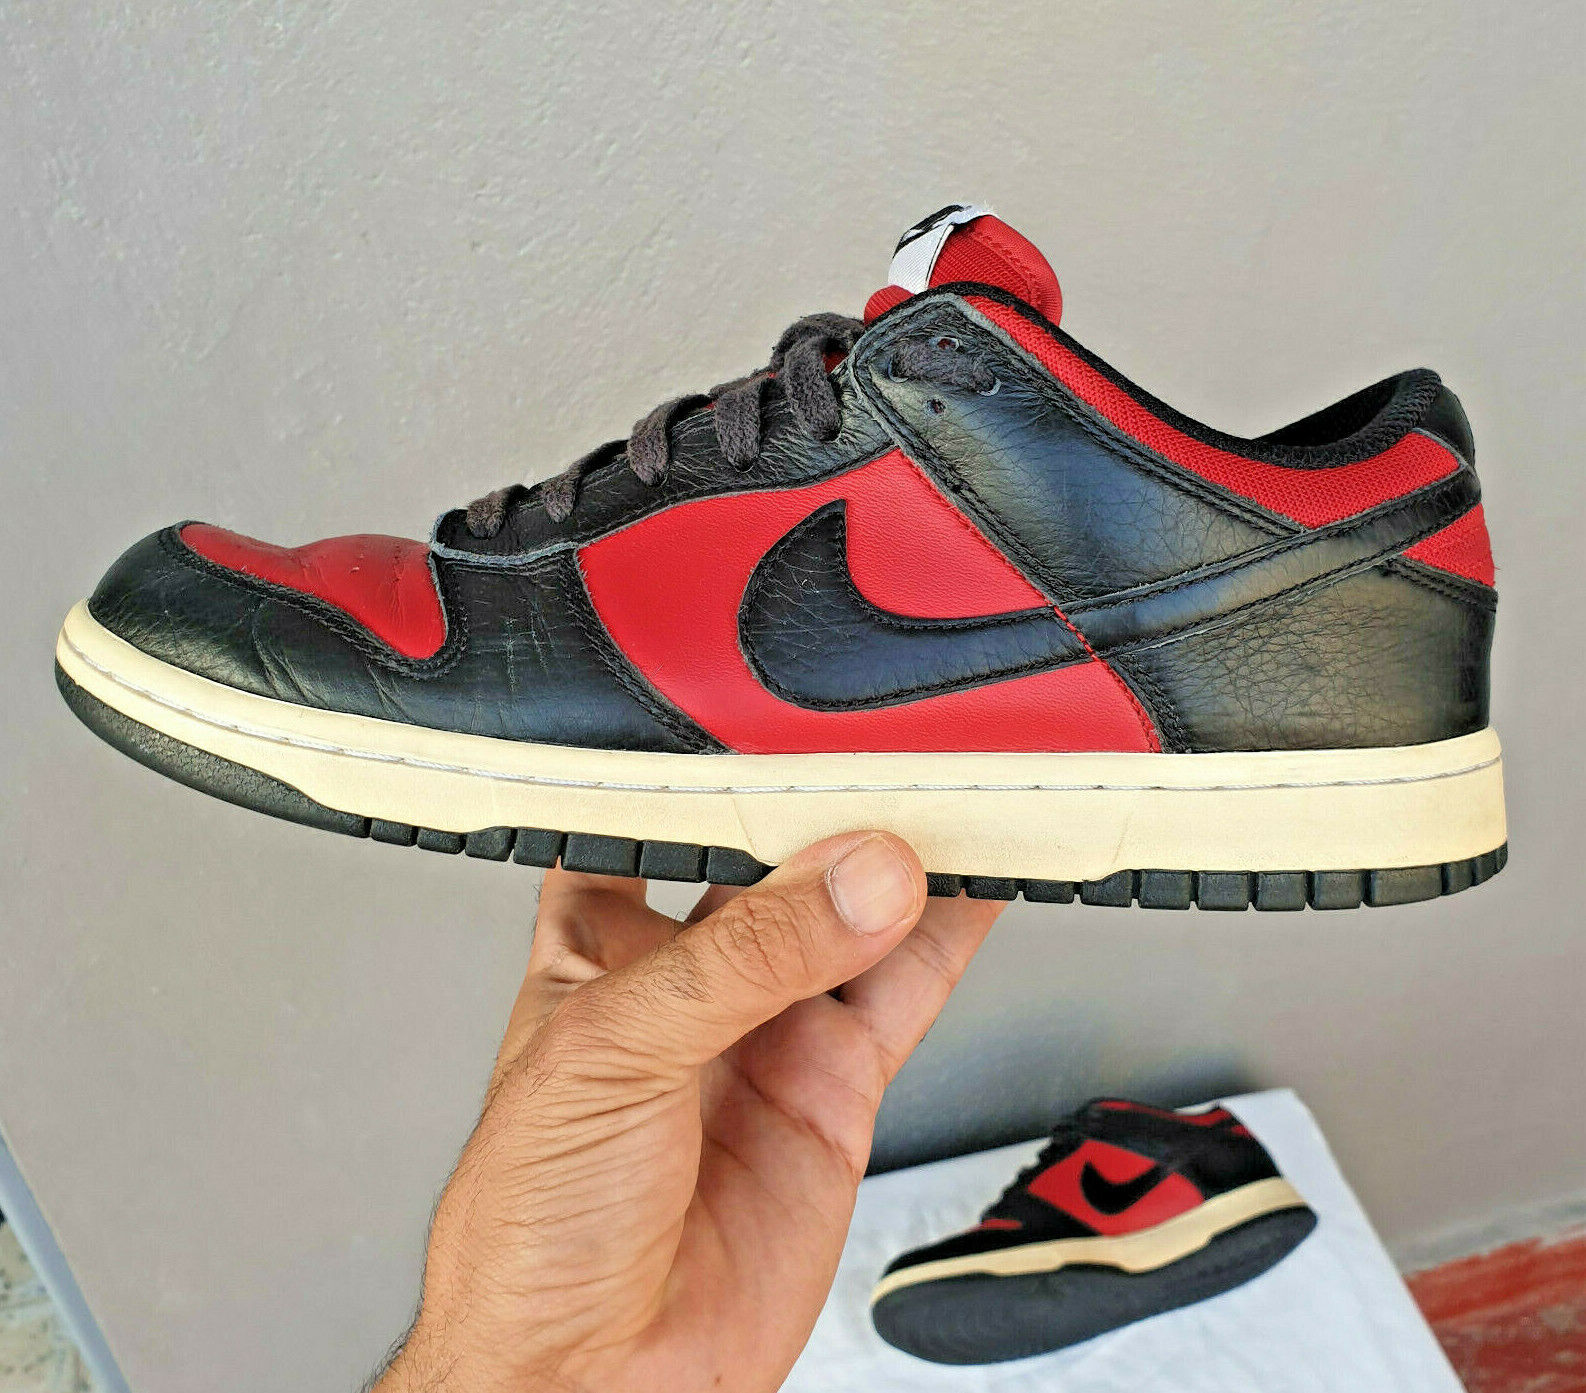 Dunk Low Pro Sneaker Bred Rare Shoes Red Black White 9.5 US | eBay